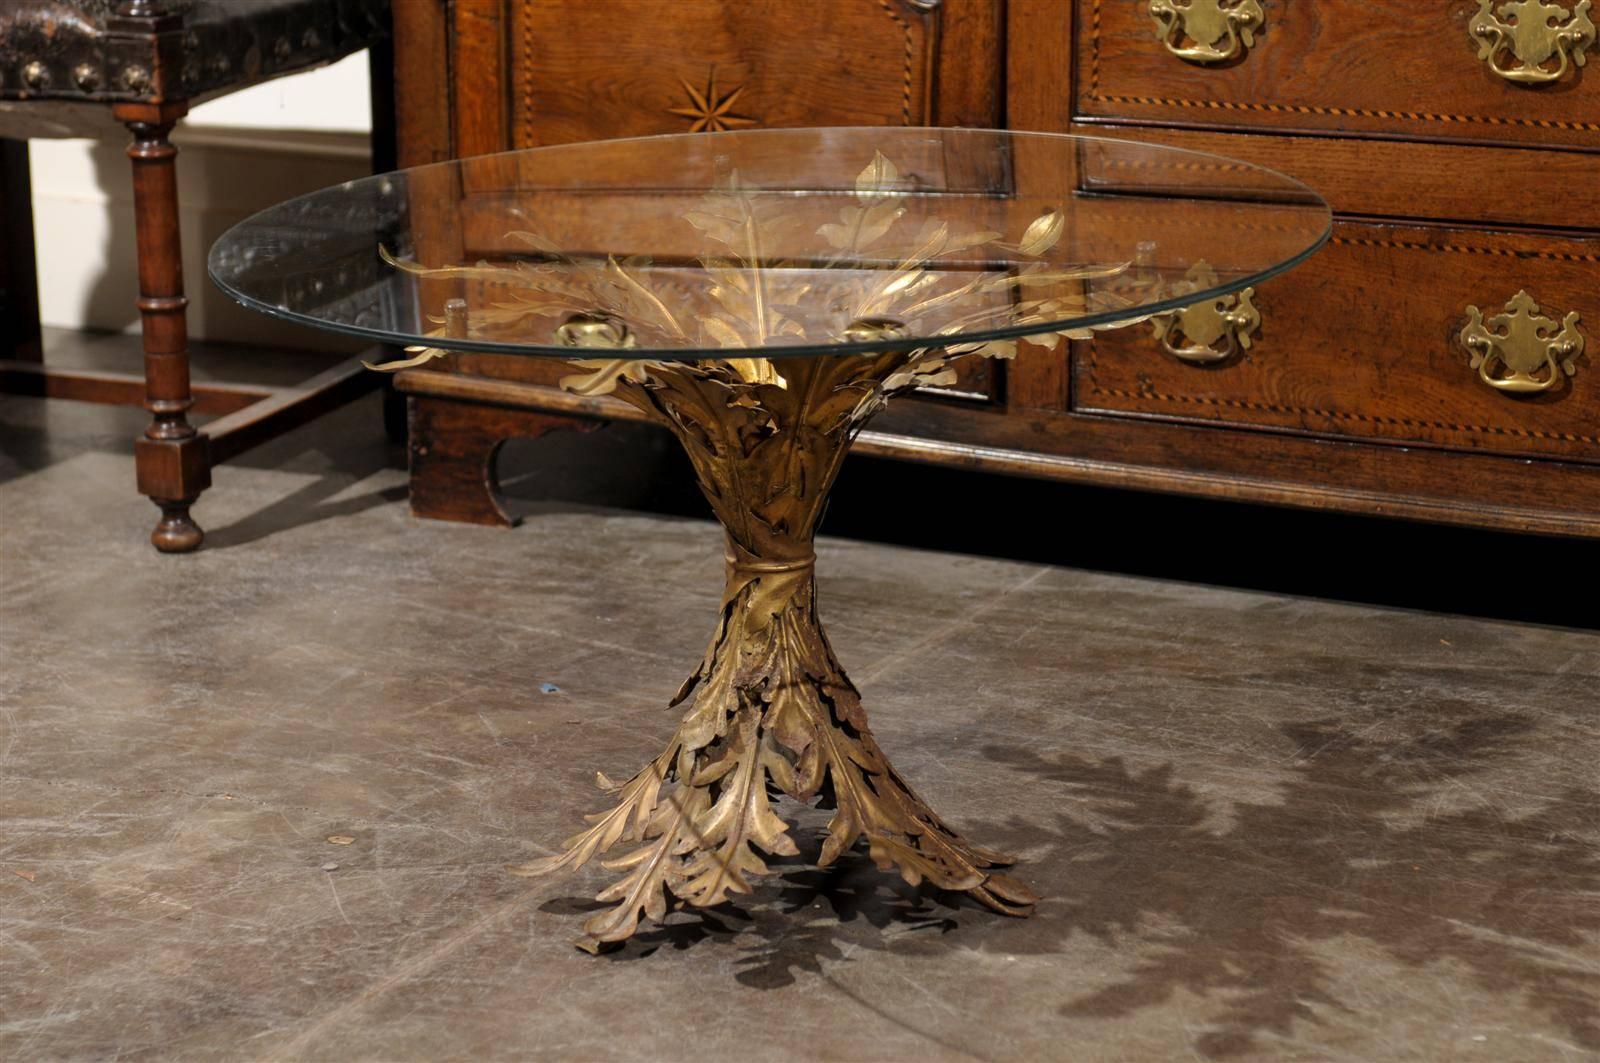 A vintage Italian gilt metal pedestal table with glass top. The base of this Italian gilt metal table is entirely decorated with a foliage motif that expands at the bottom, draws narrow in the middle and blossoms at the top. The top of this circa